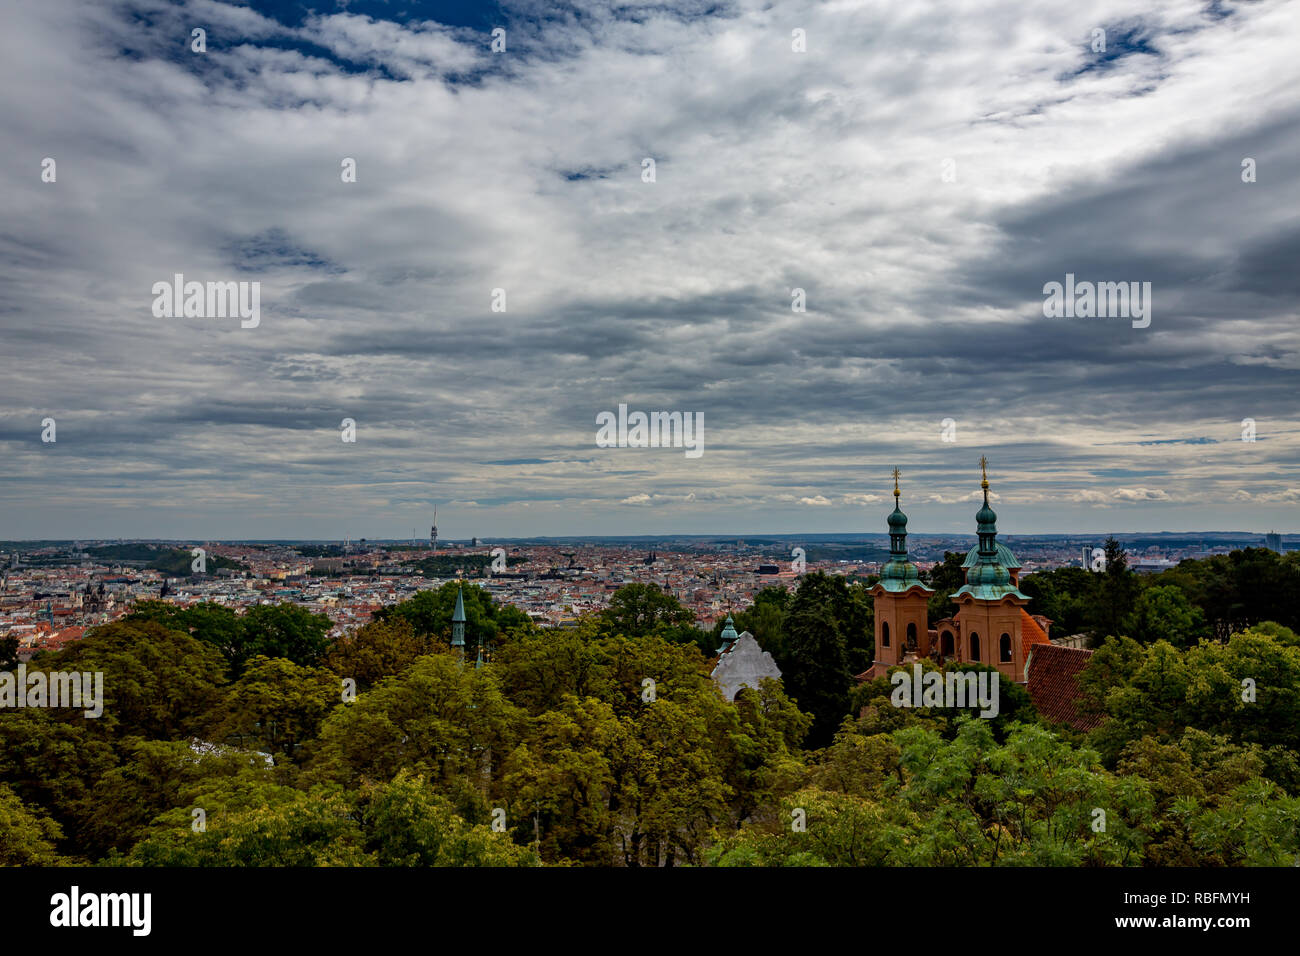 Amazing architecture of Cathedral of Saint Lawrence in Petrin Park, Prague, Czech Republic as seen from above, observation and lookout tower Stock Photo